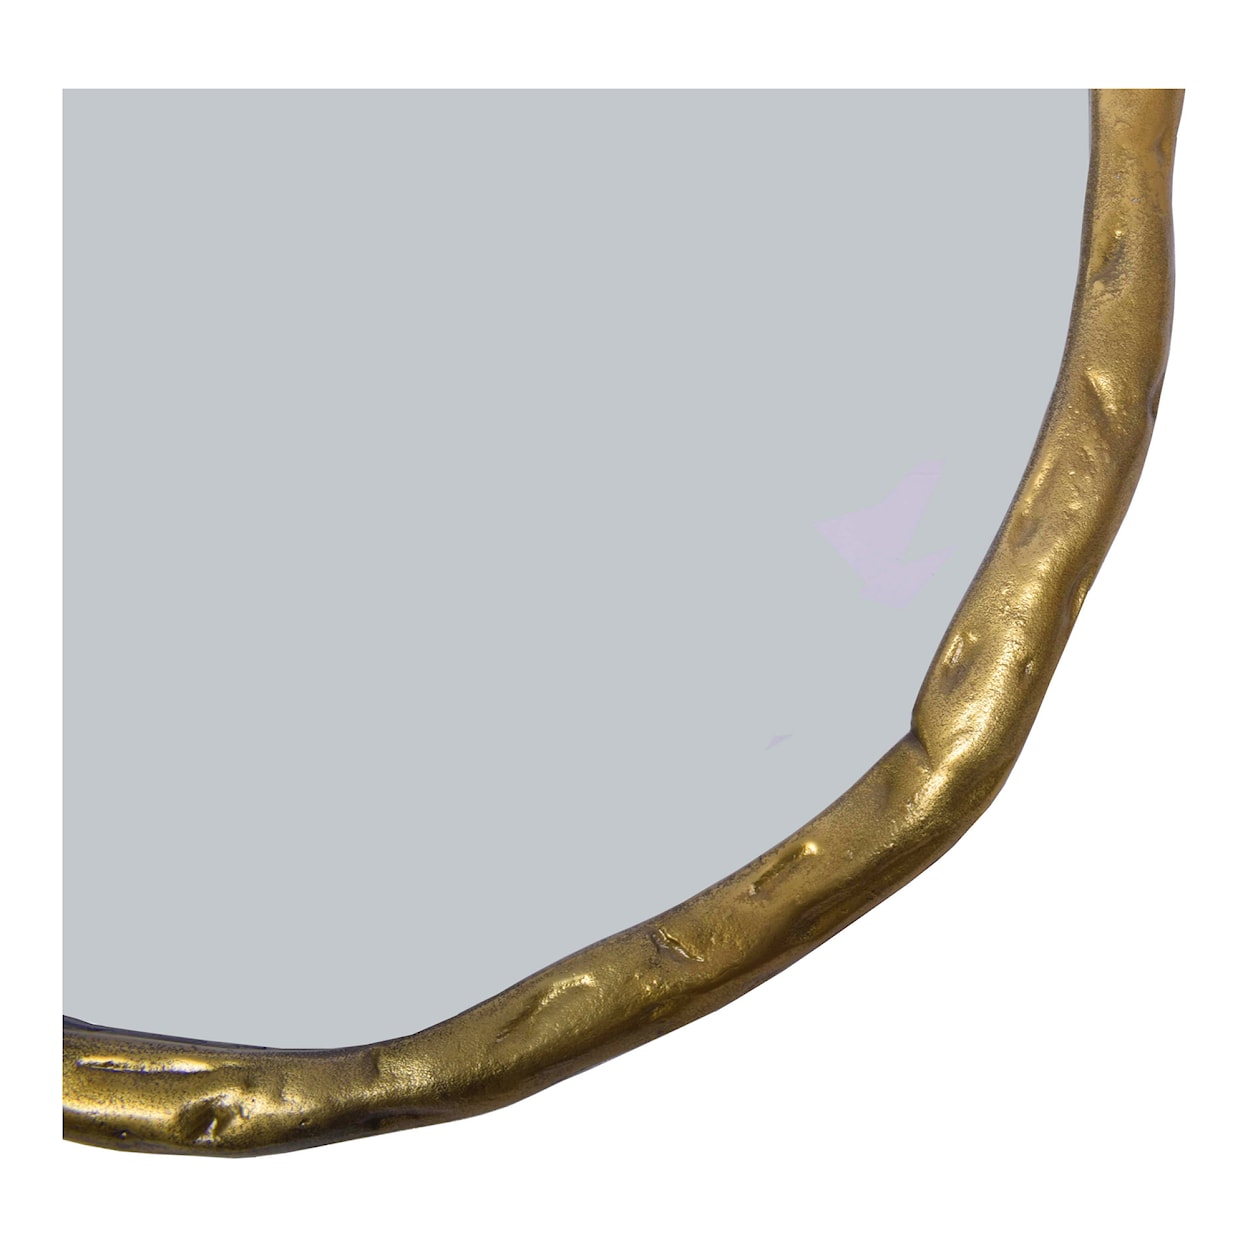 Moe's Home Collection Foundry Foundry Mirror Large Gold